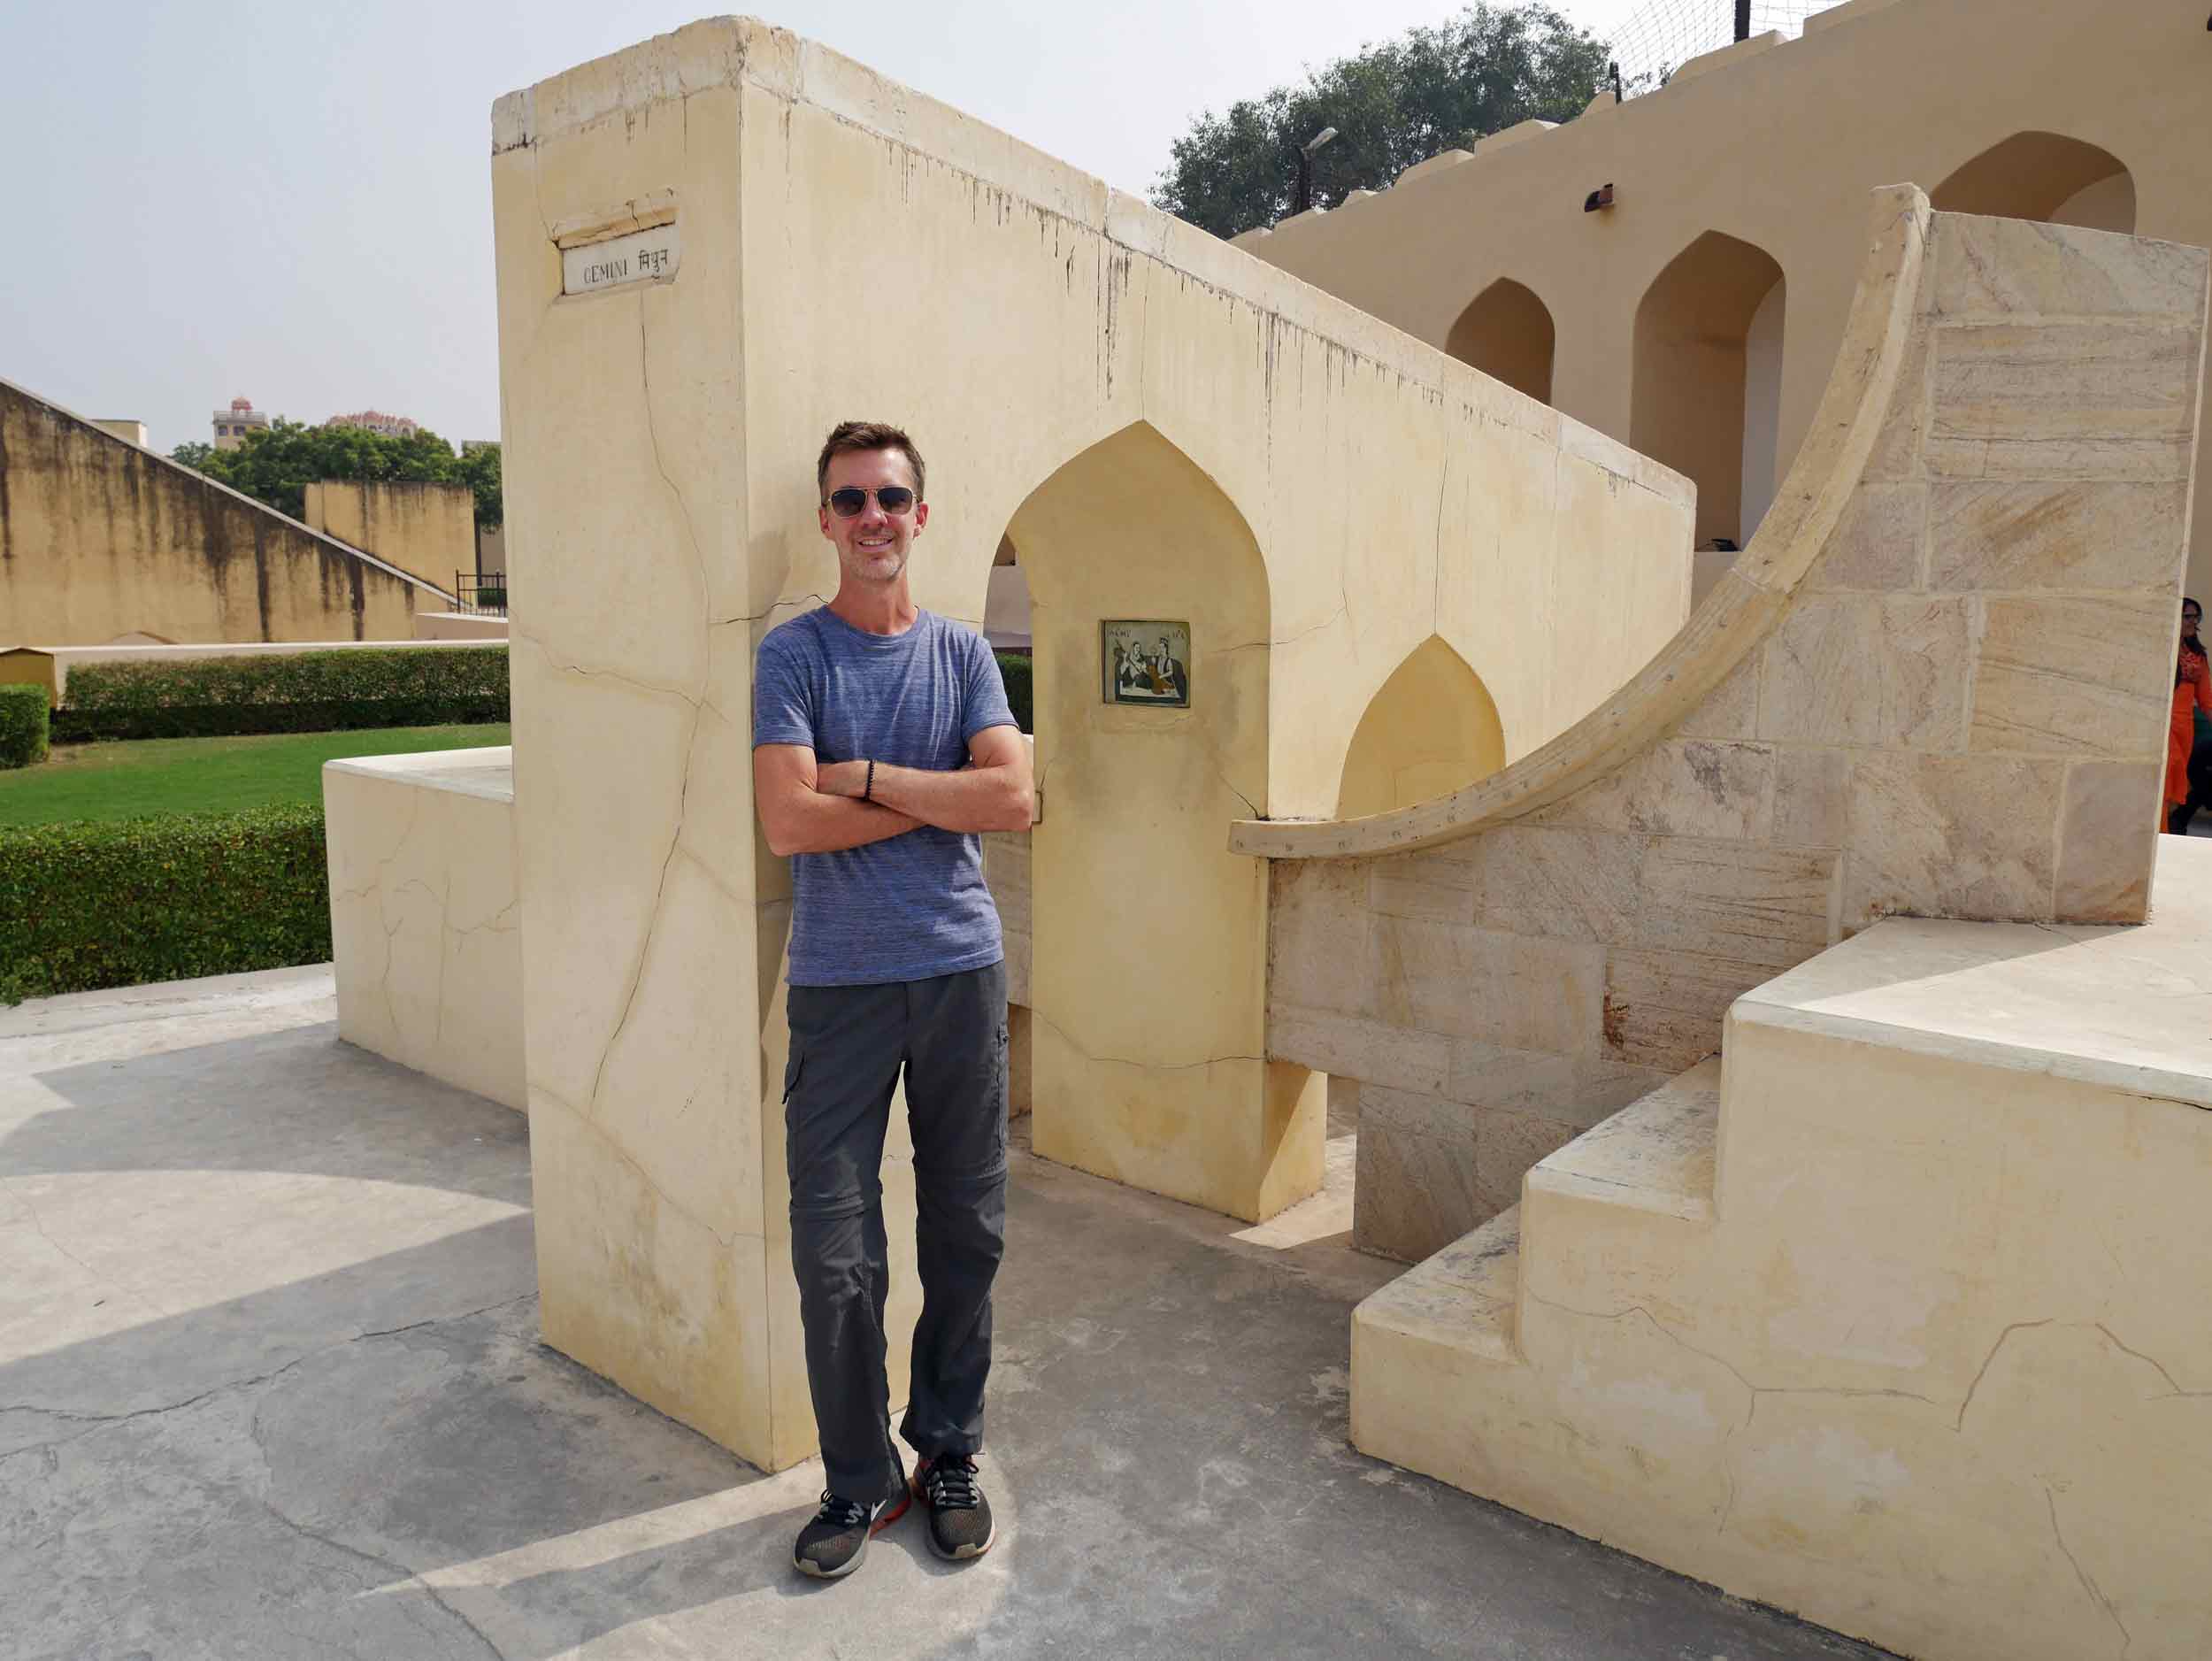  Astrological signs have their own ‘clocks’ within the Jantar Mantar site – Trey checking out Gemini. 